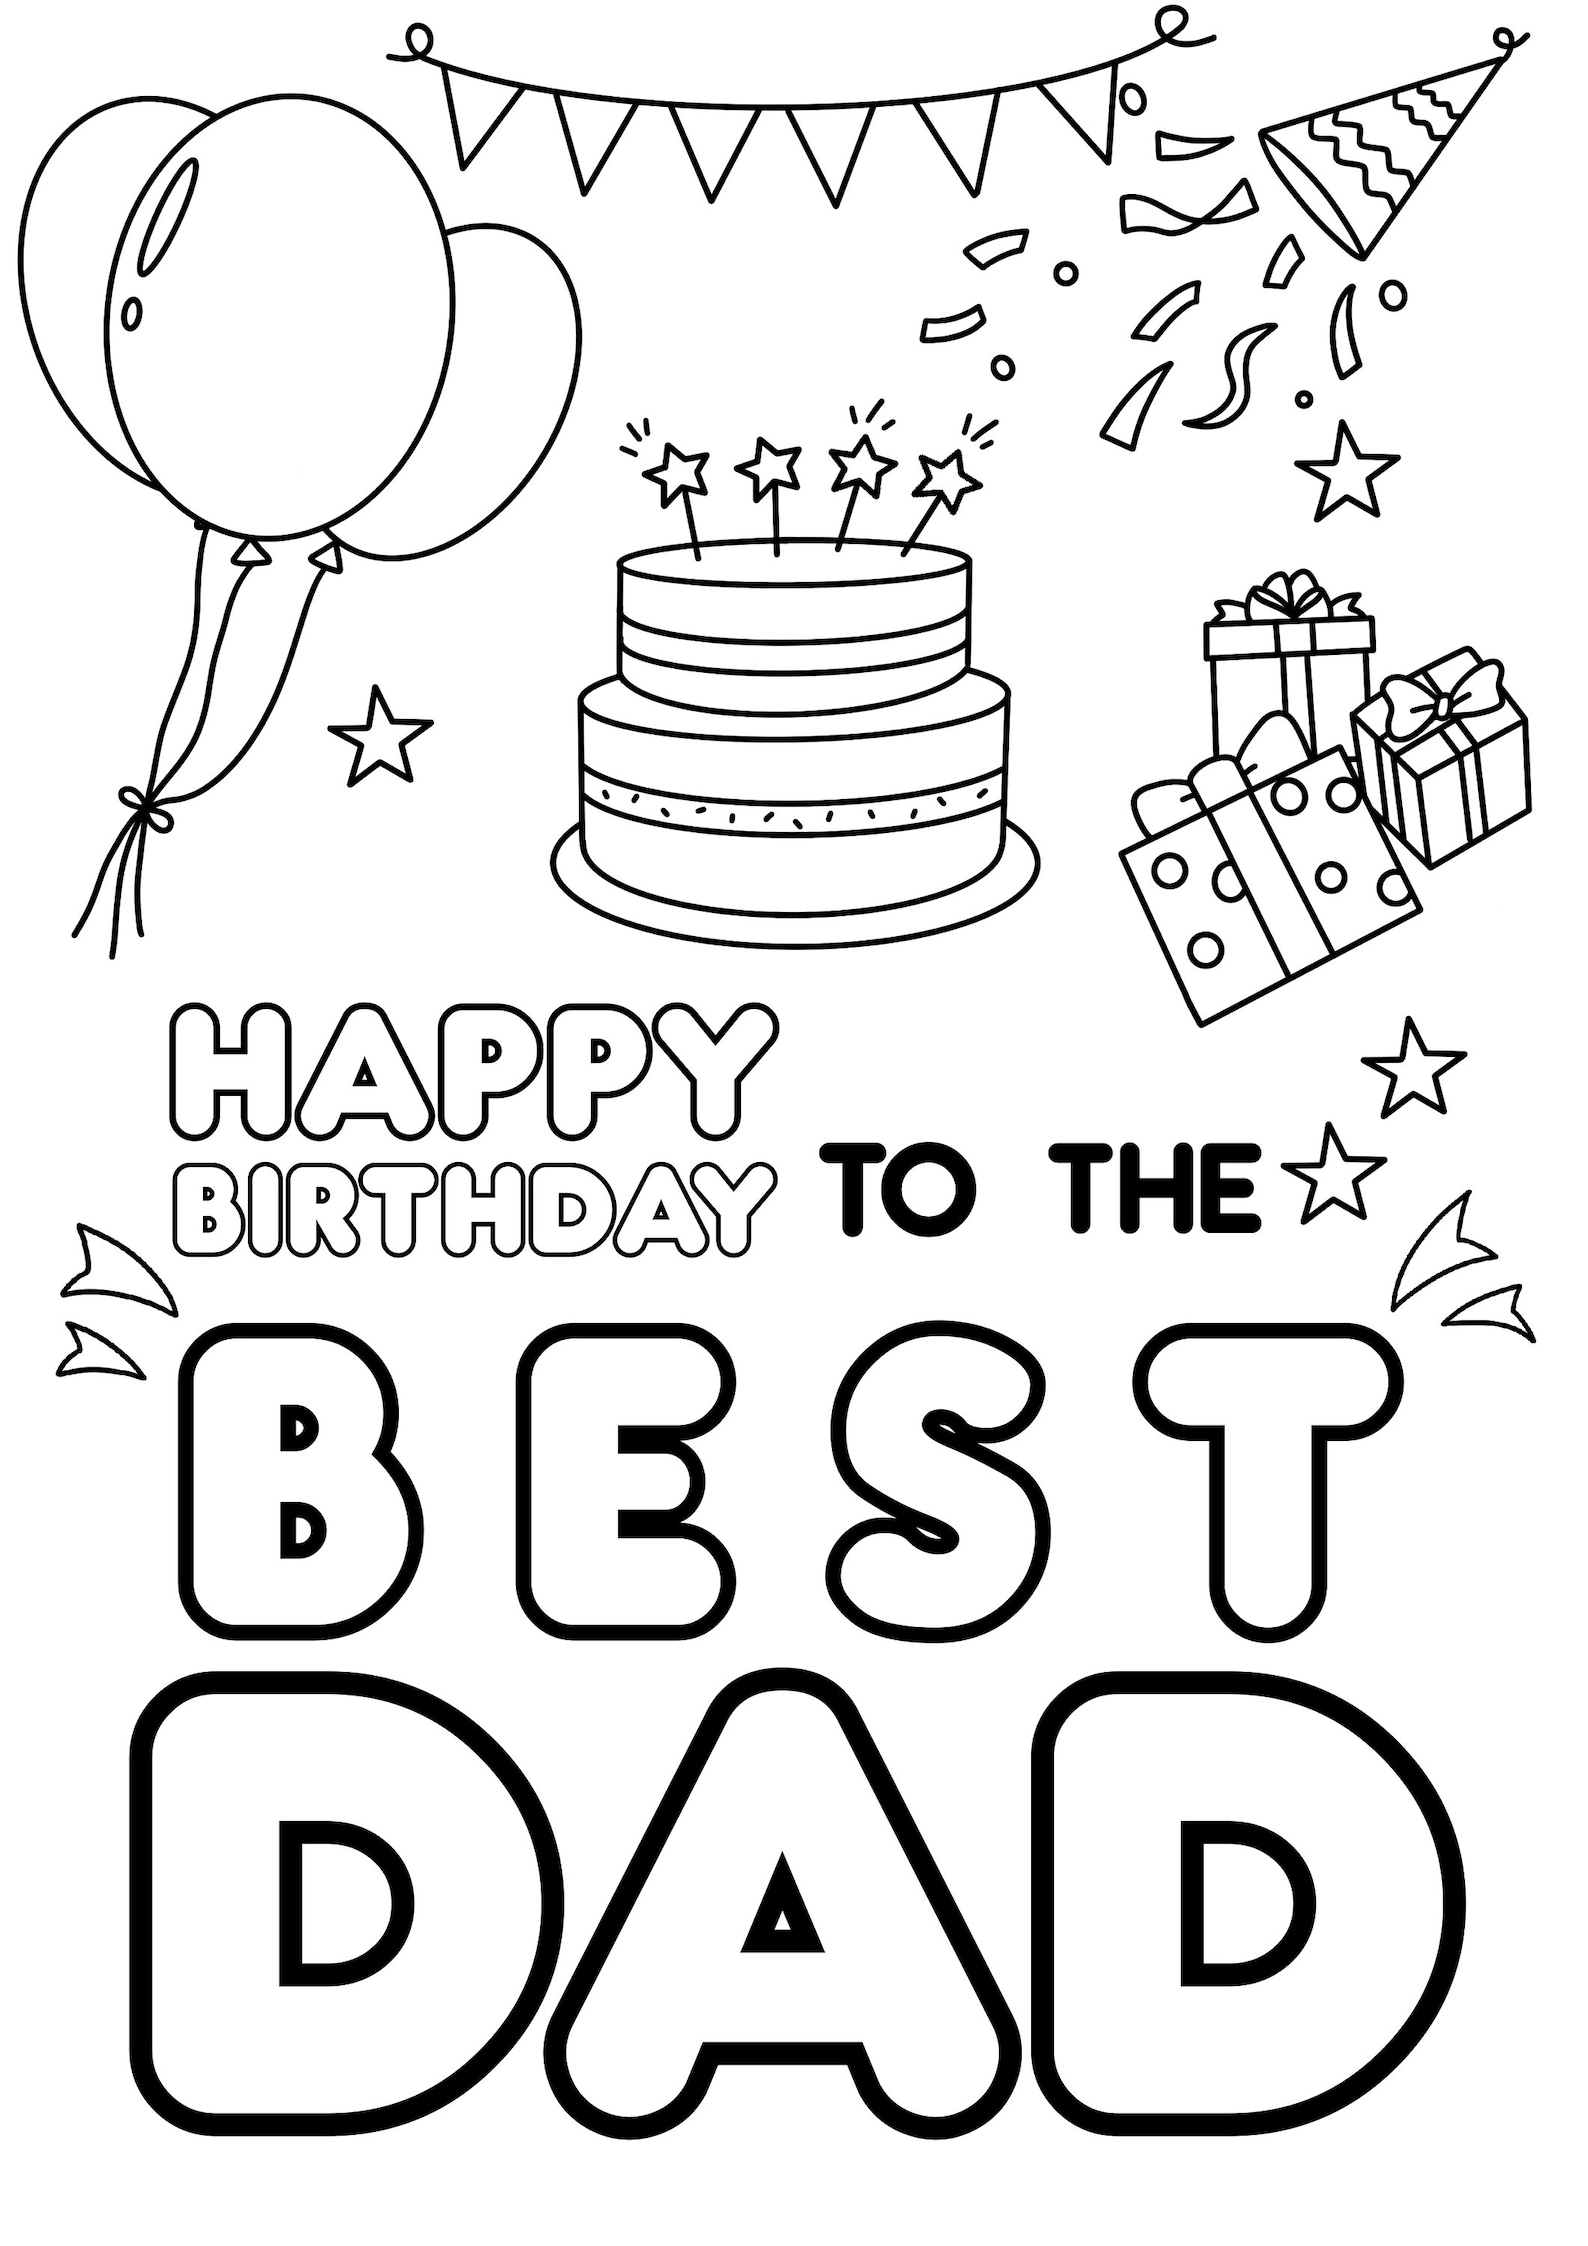 happy-birthday-to-the-best-dad-coloring-card-envelope-etsy